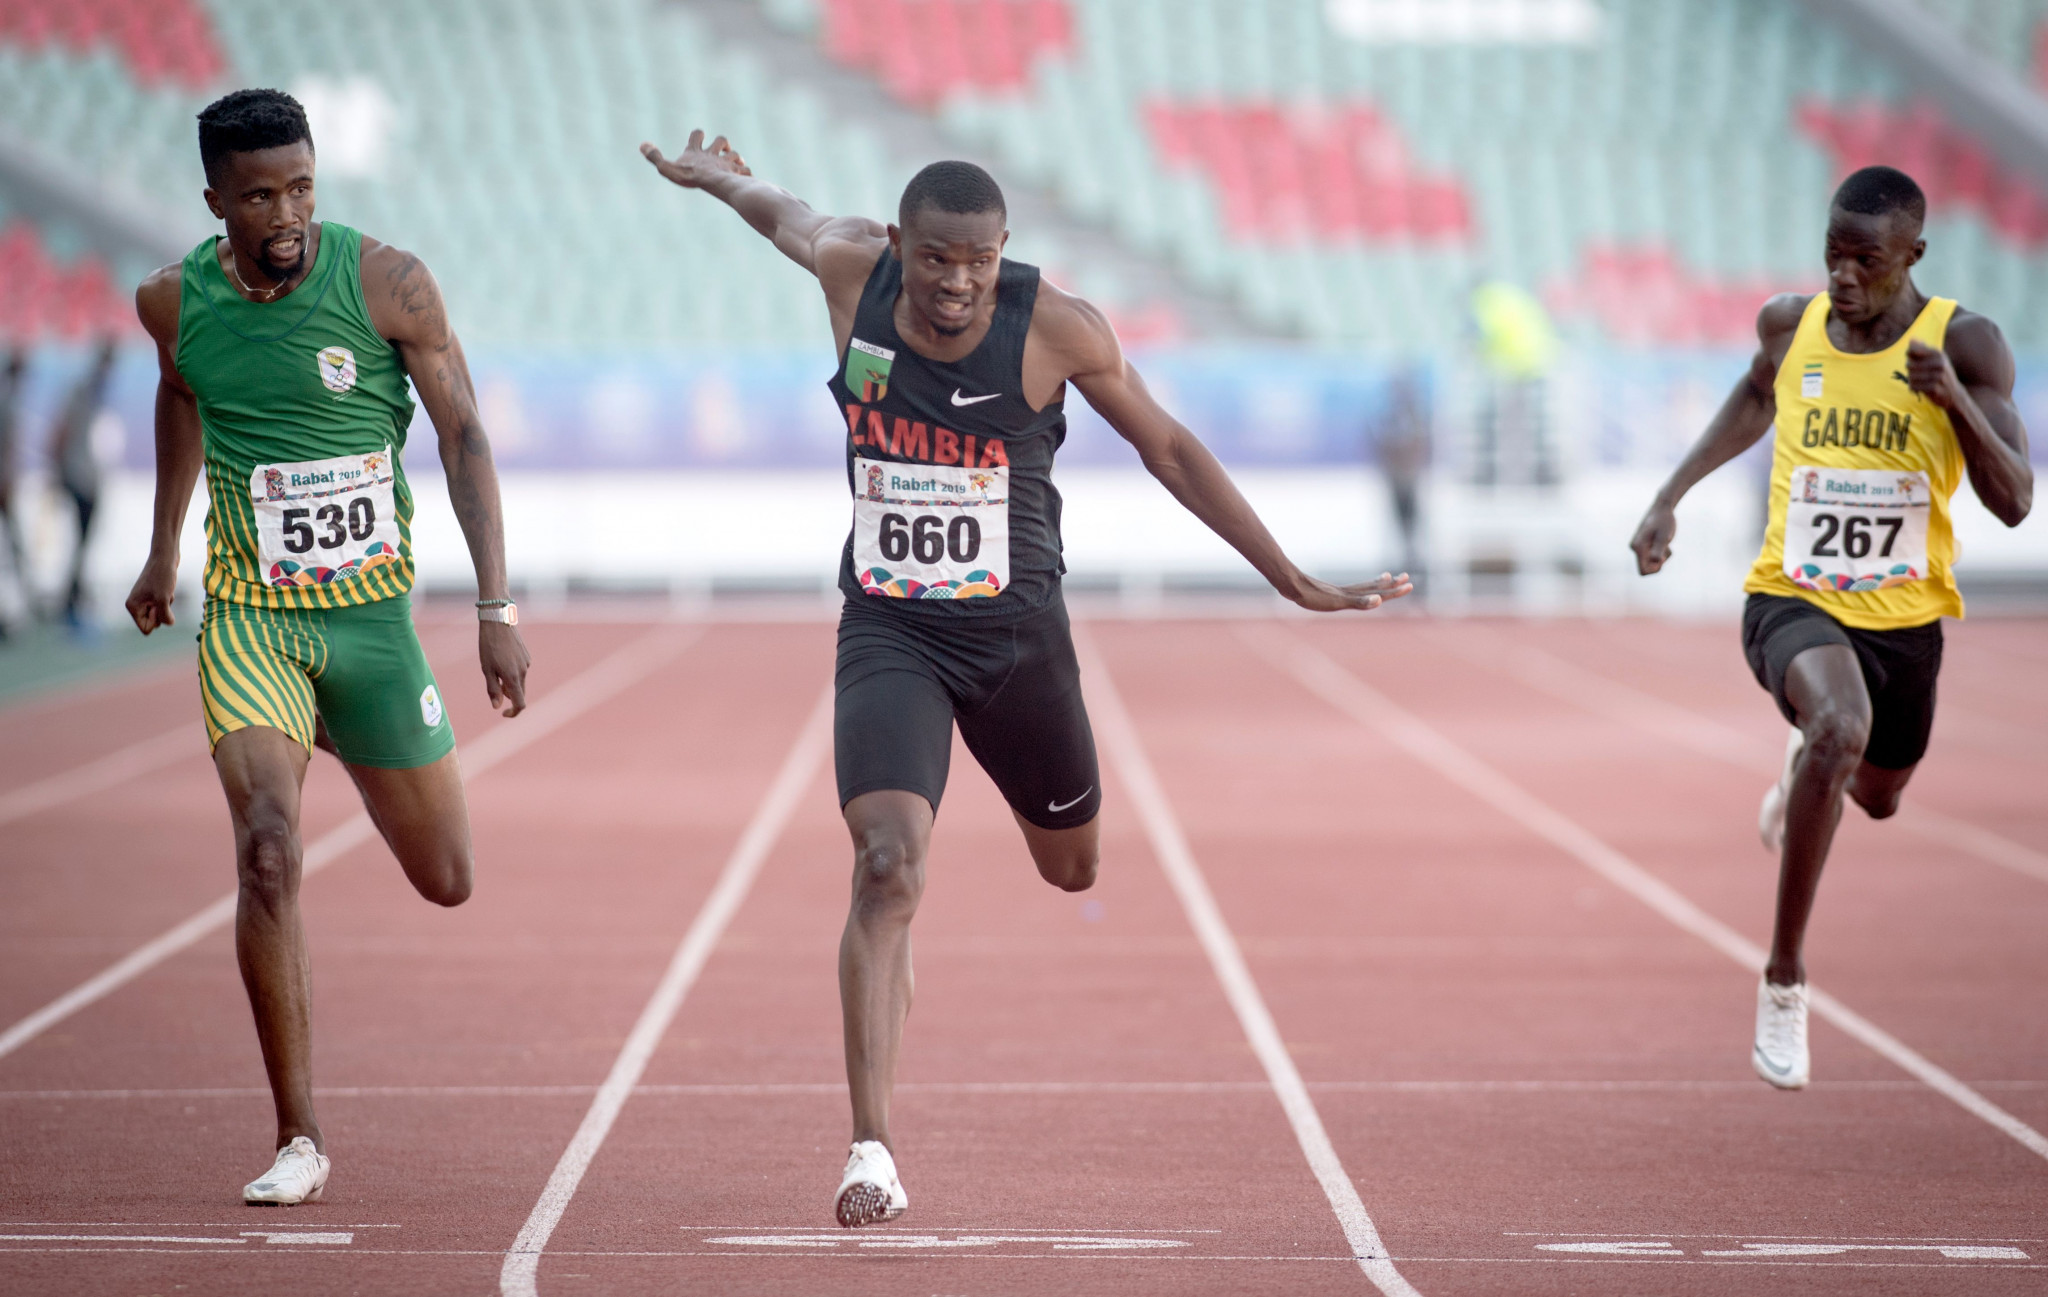 Sydney Siame of Zambia won gold in the men's 200m at the African Games in Rabat ©Getty Images